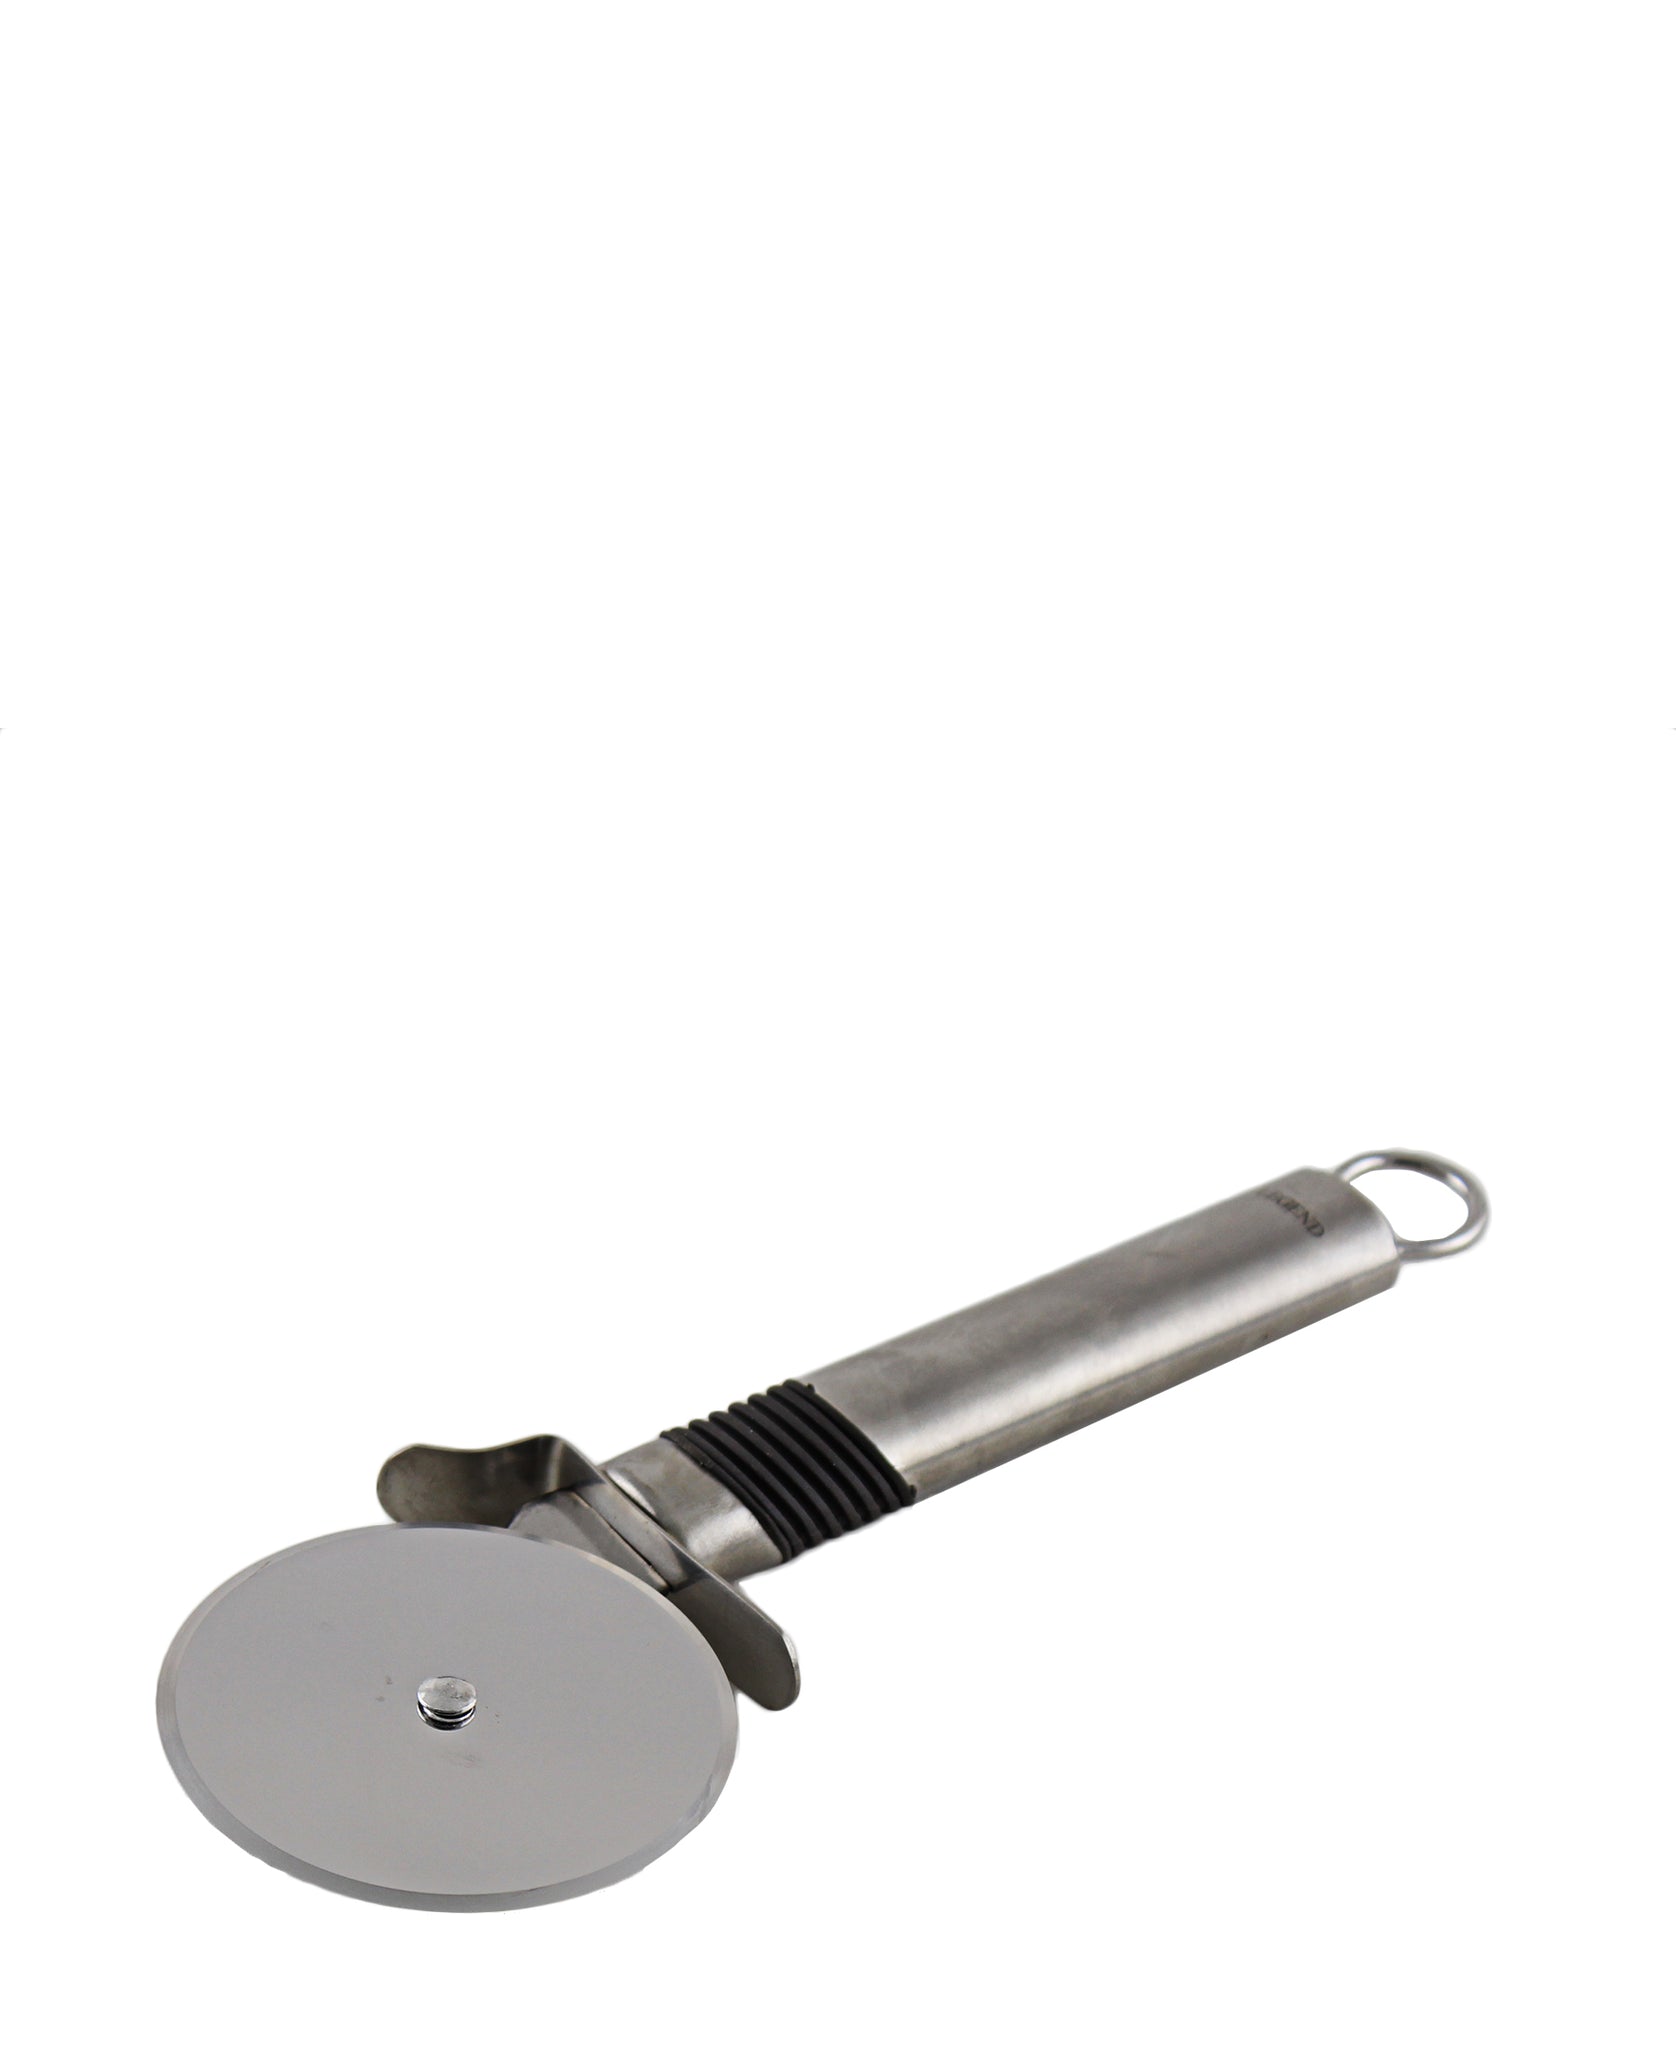 Legend Stainless Steel Pizza Cutter - Silver